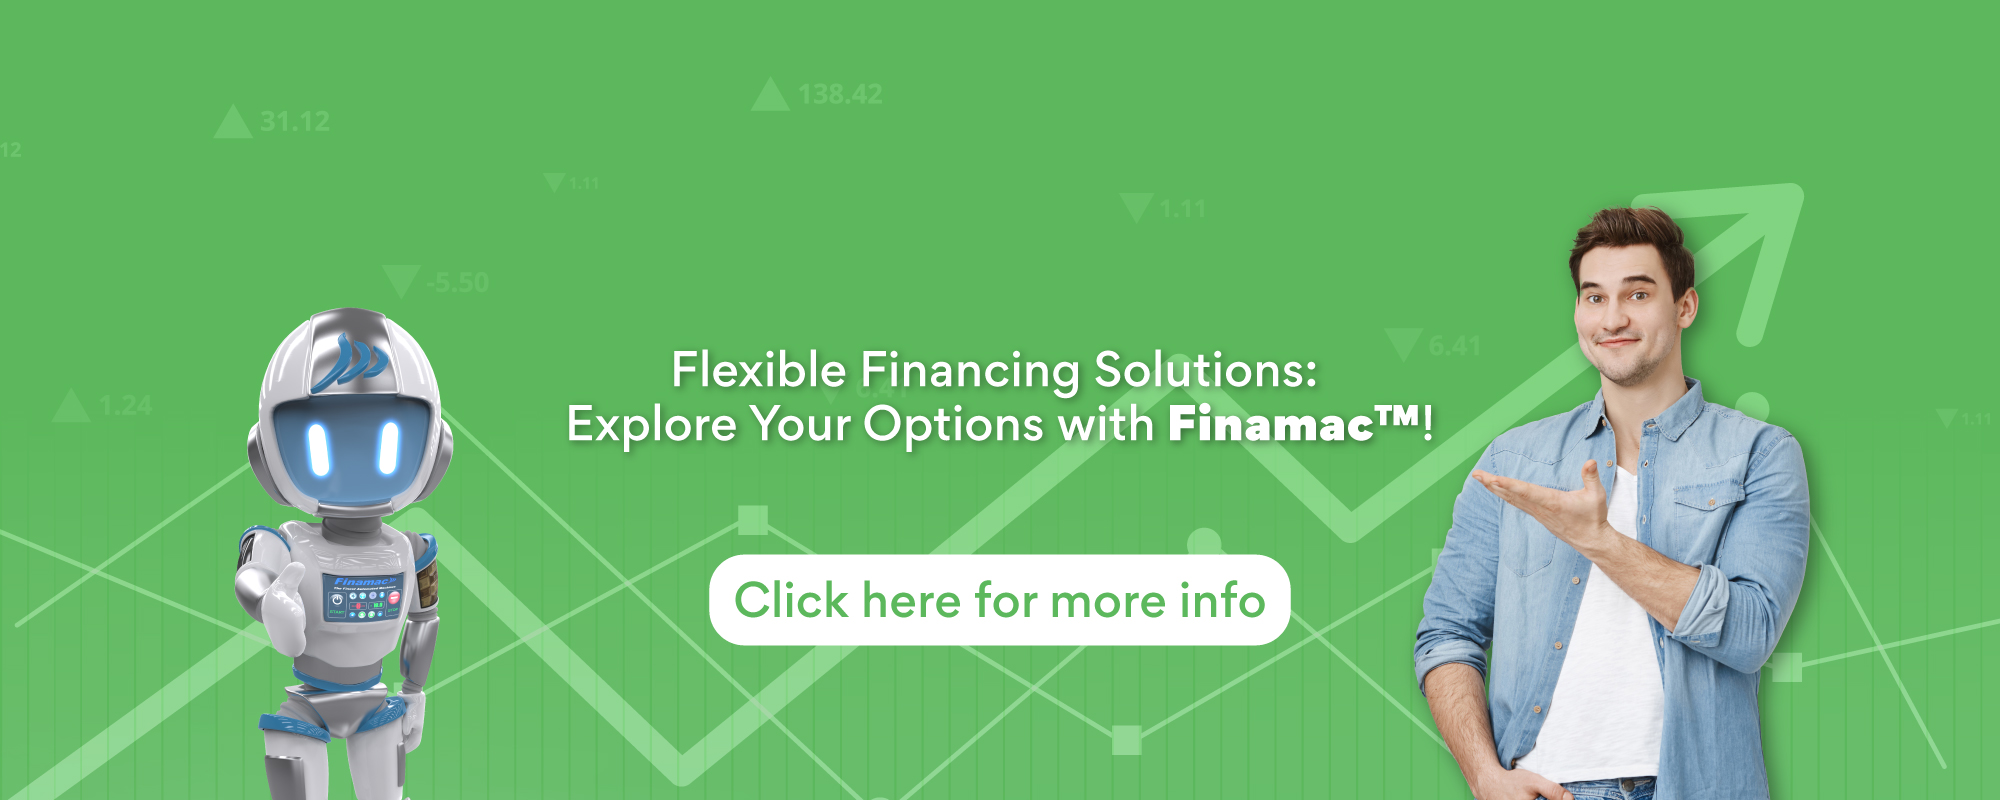 Flexible Financing Solutions: Explore Your Options with Finamac™!